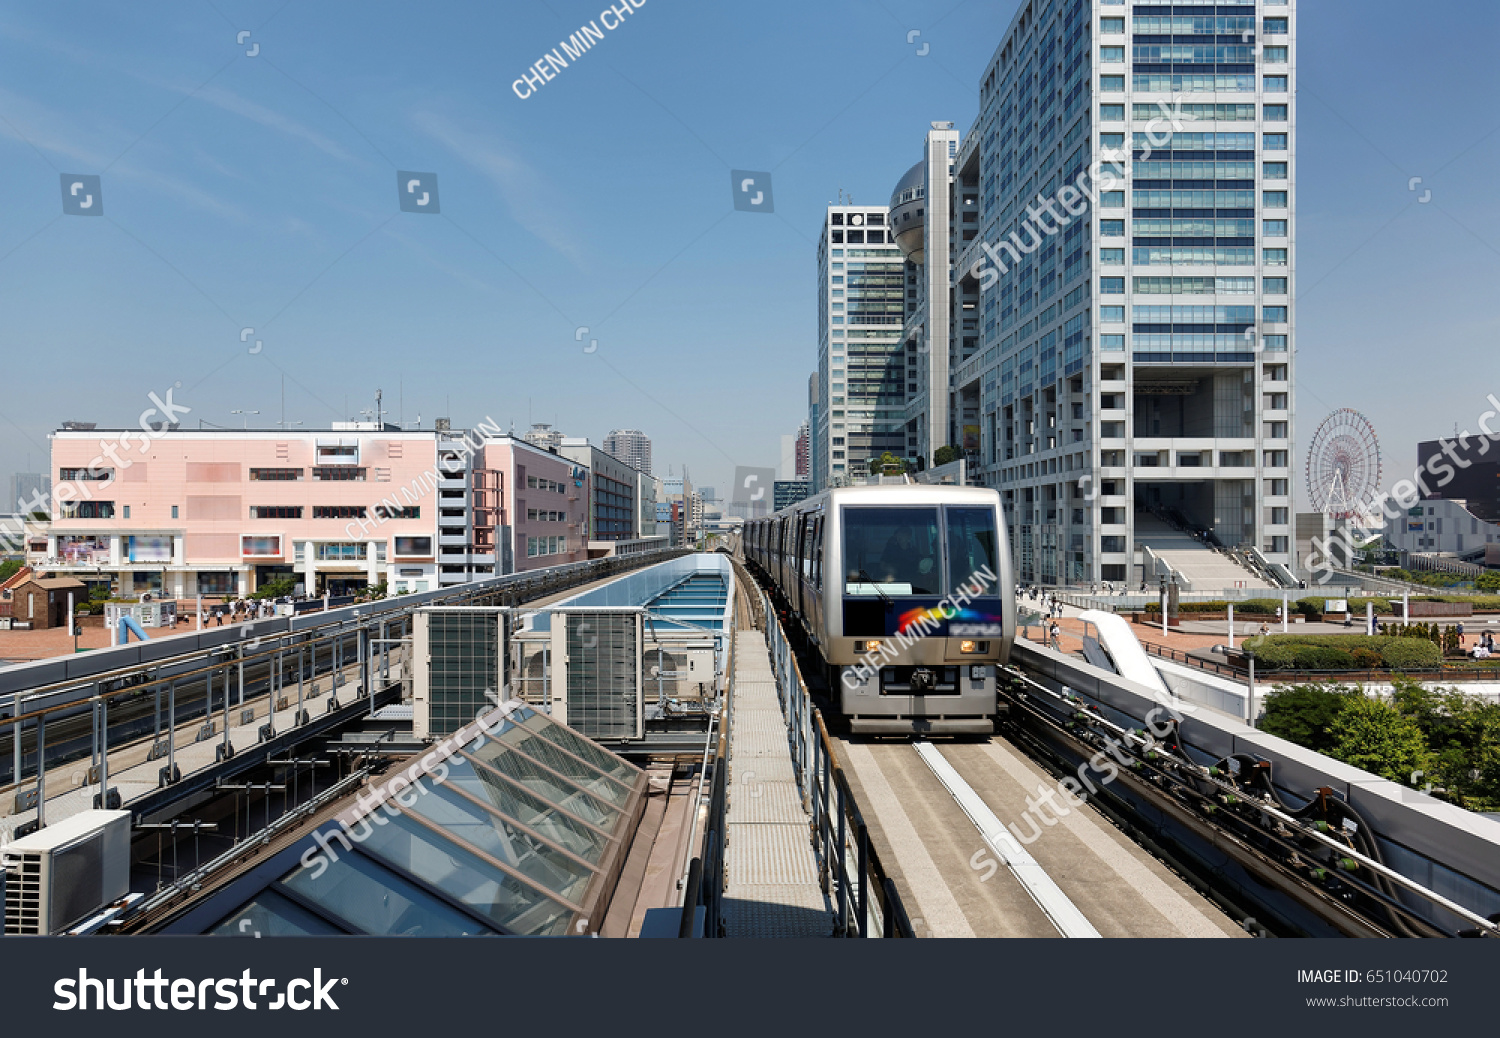 Scenery of a train traveling on the elevated rail of Yurikamome Line, passing by the famous landmark Fuji TV Building in Odaiba, Minato, Tokyo, under blue clear sunny sky (colorful painting version) #651040702